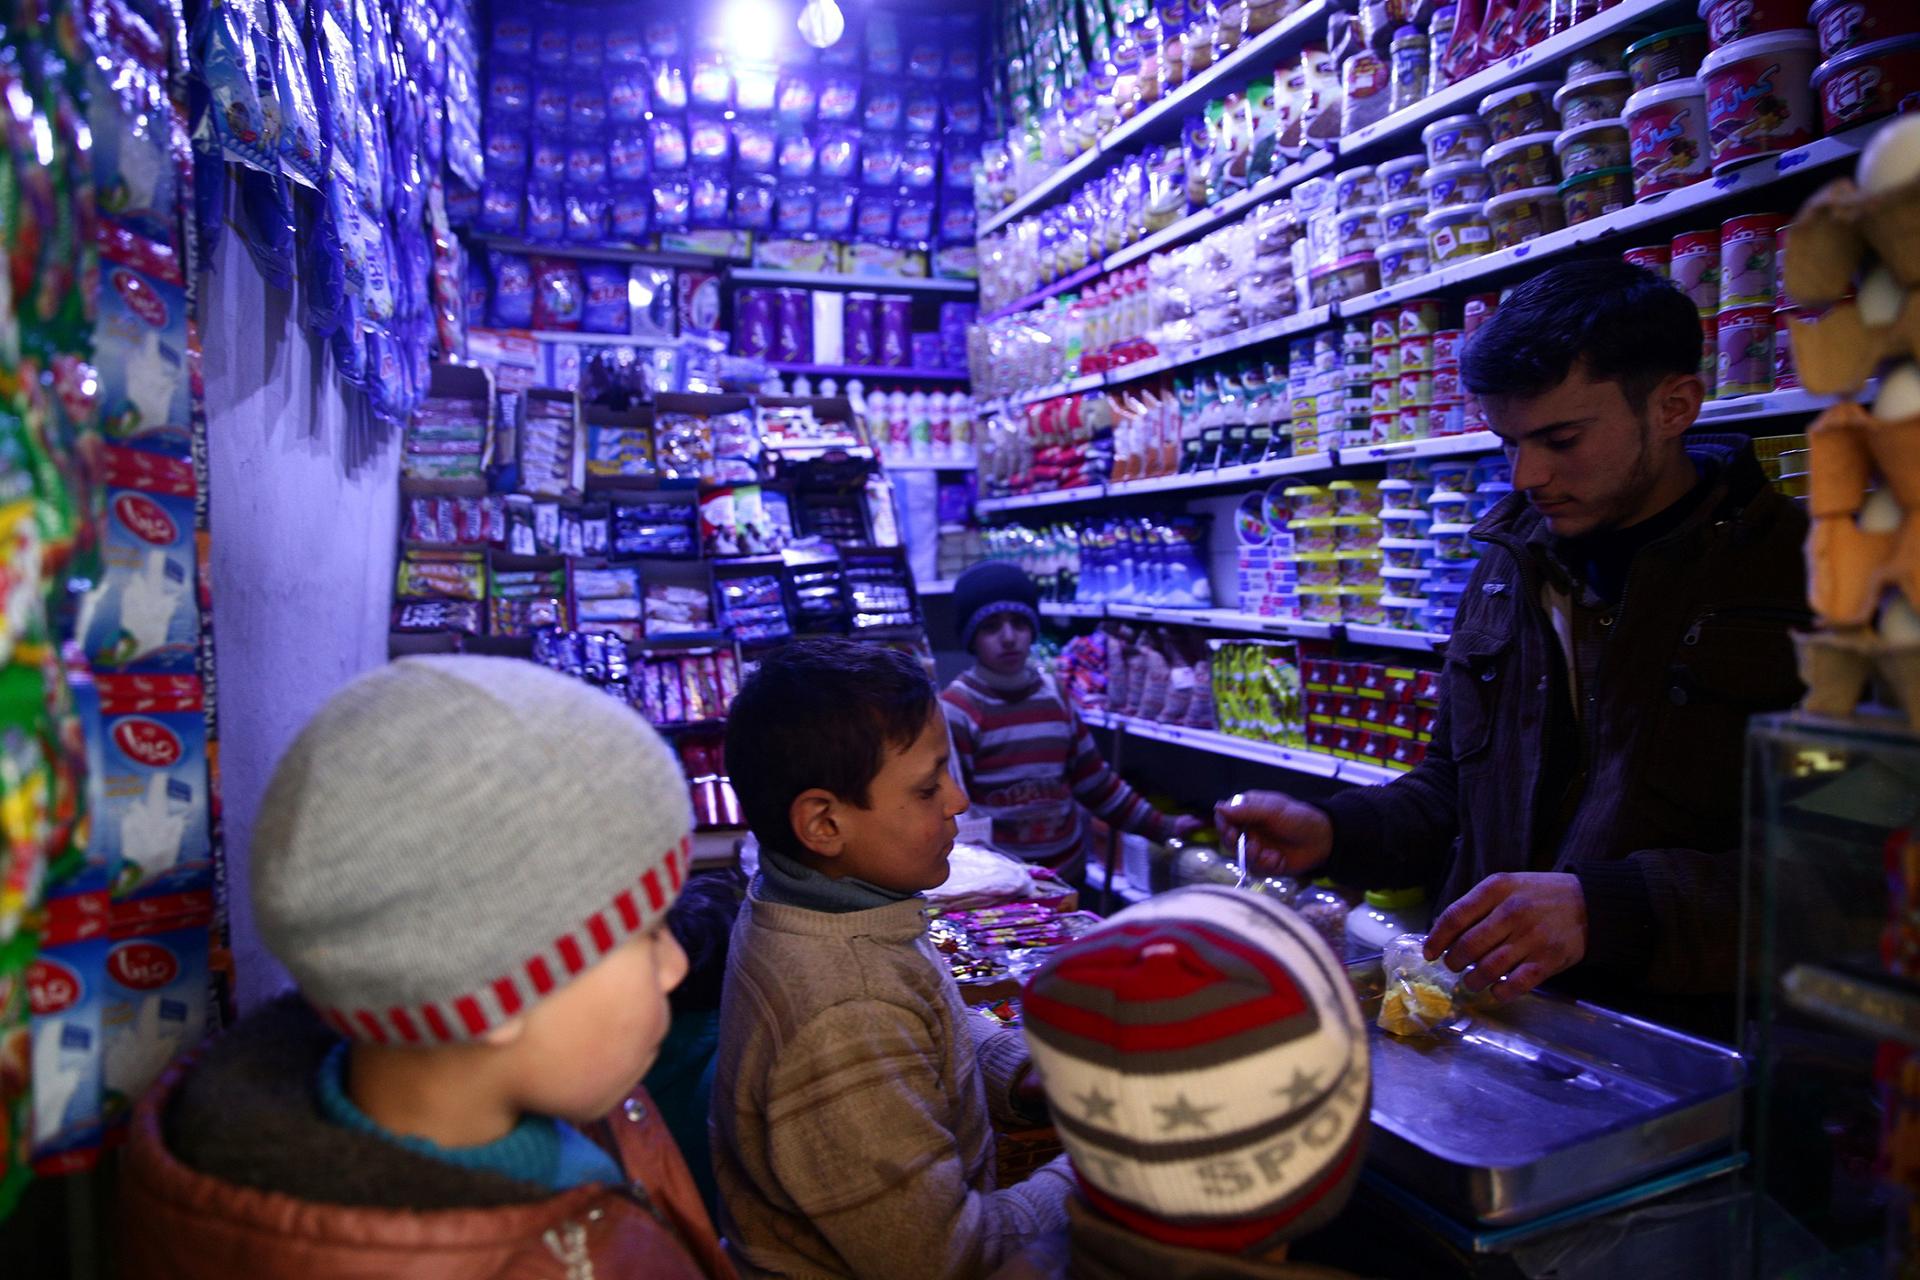 Boys buy goods from a grocery shop in the rebel-held, besieged Damascus suburb of Eastern Ghouta, Syria, Feb. 12, 2017.